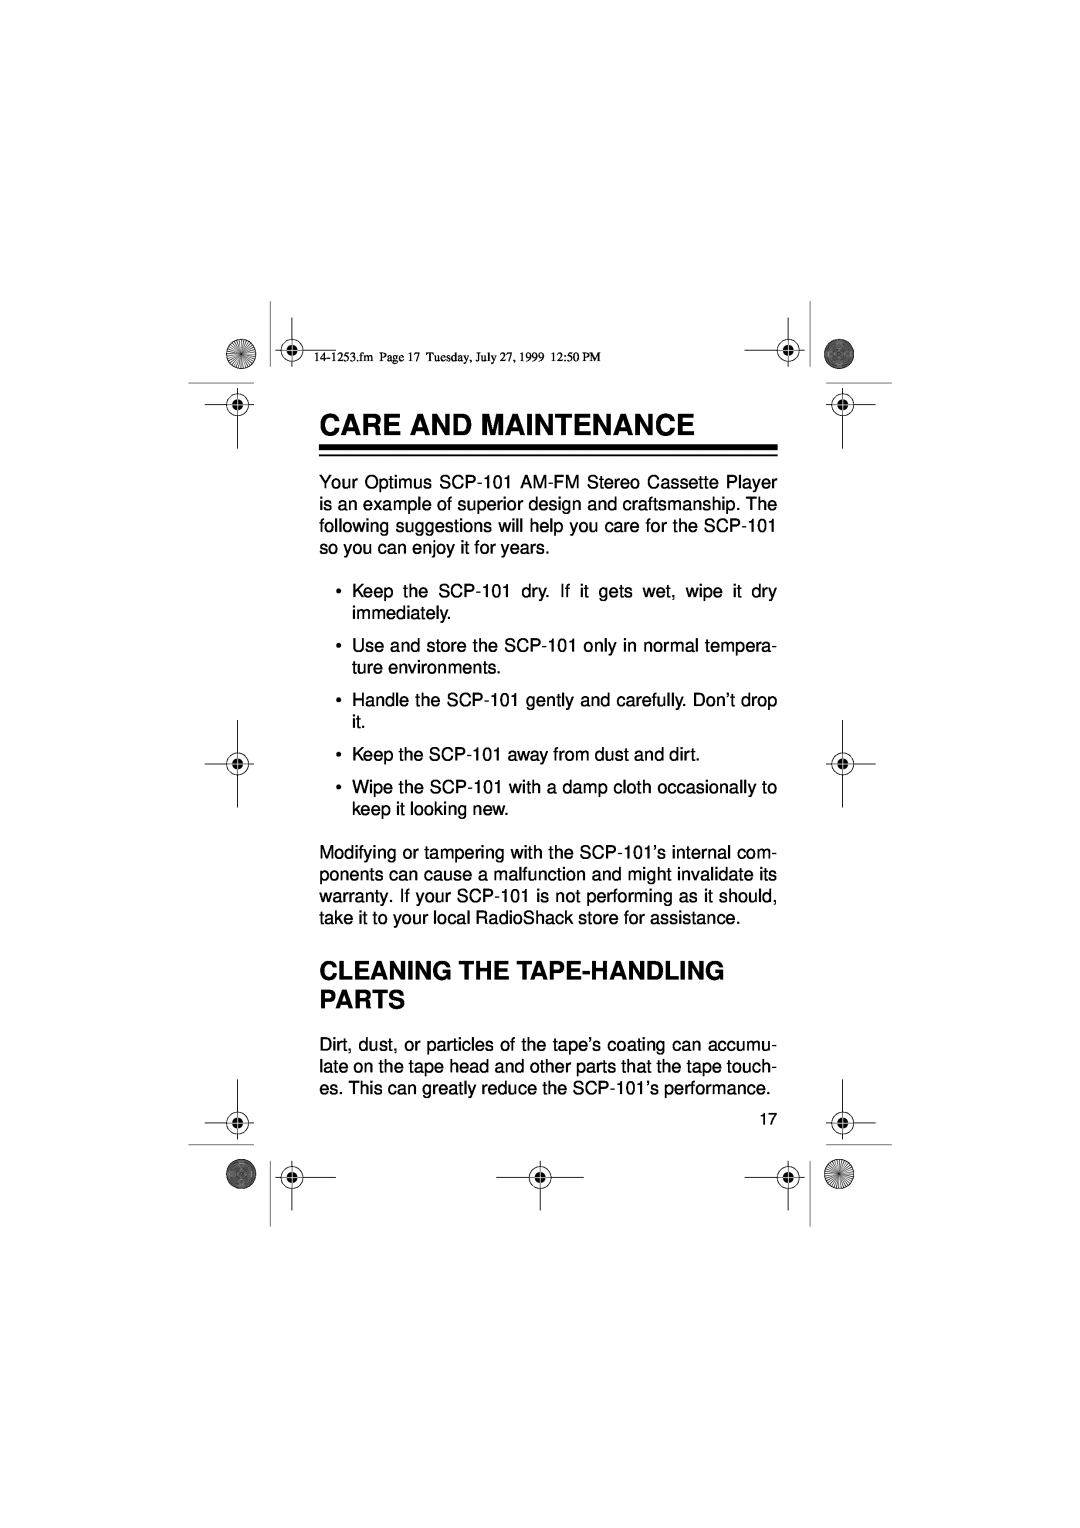 Optimus SCP-101 manual Care And Maintenance, Cleaning The Tape-Handlingparts 